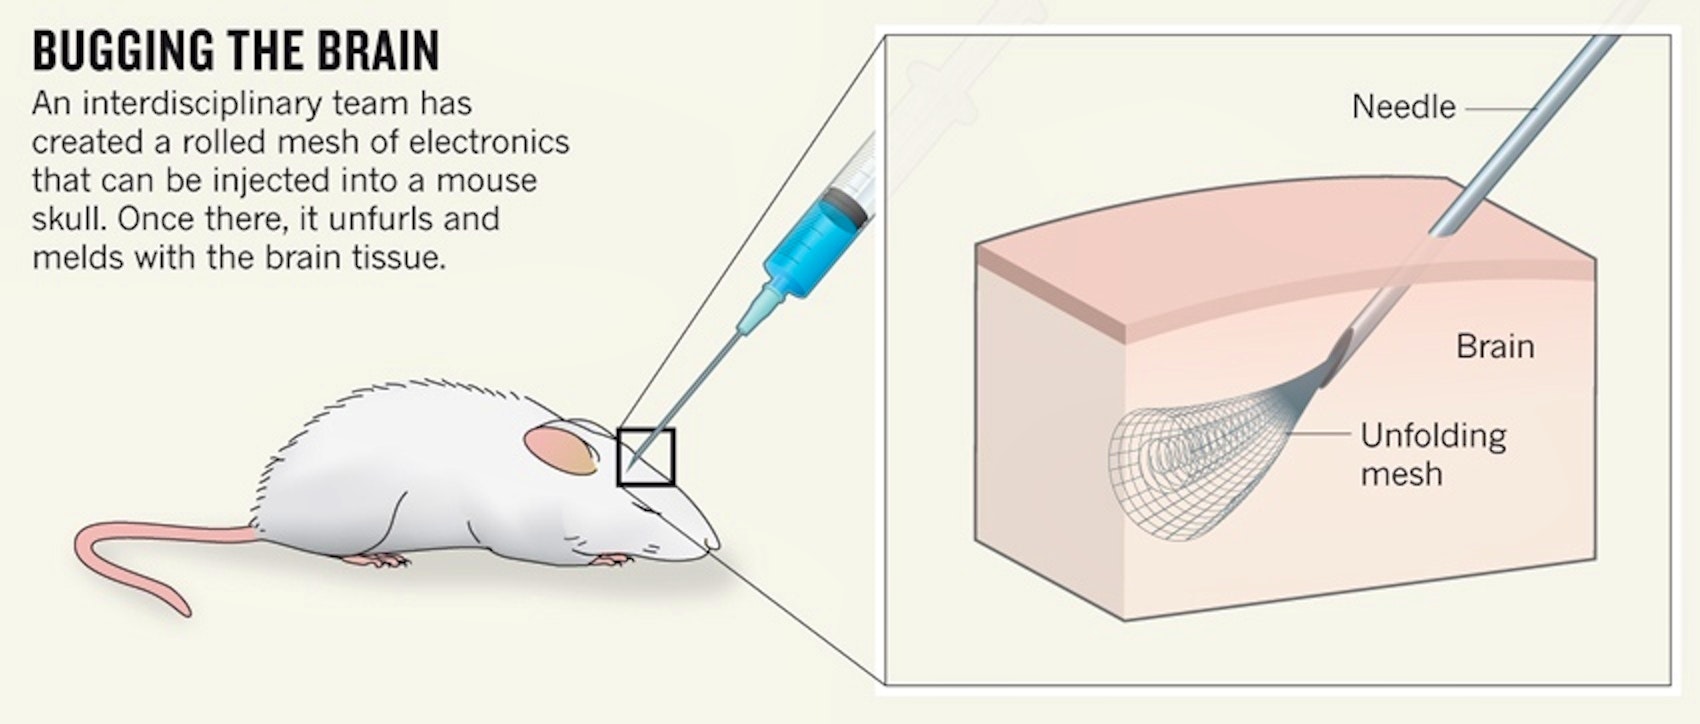 Researchers illustrate how neural mesh was injected into mice. 